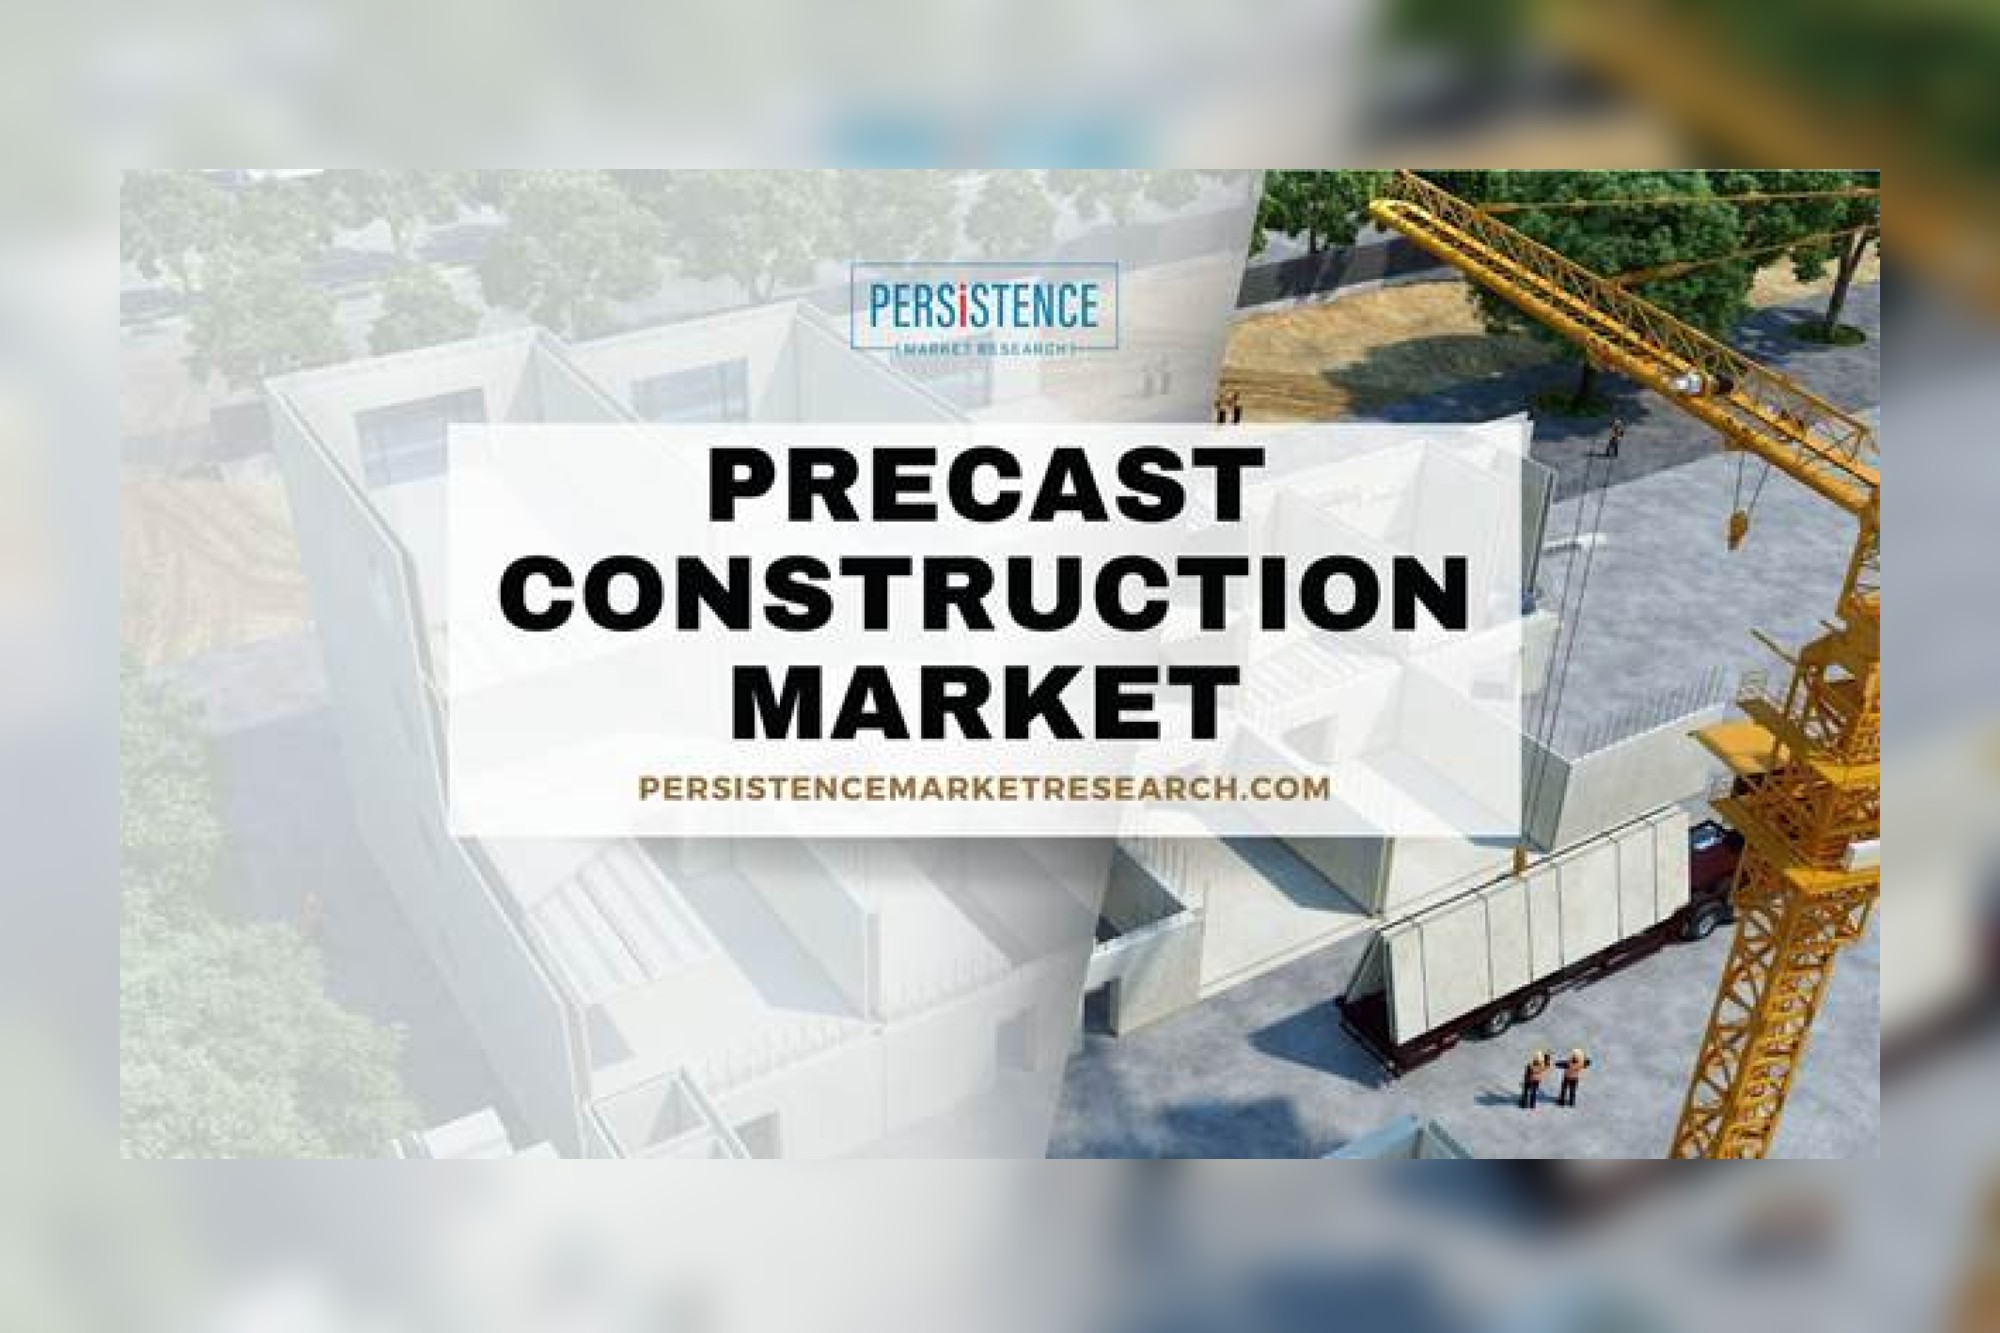 Precast Construction Market Witnesses Steady Expansion Across Global Infrastructure Projects.